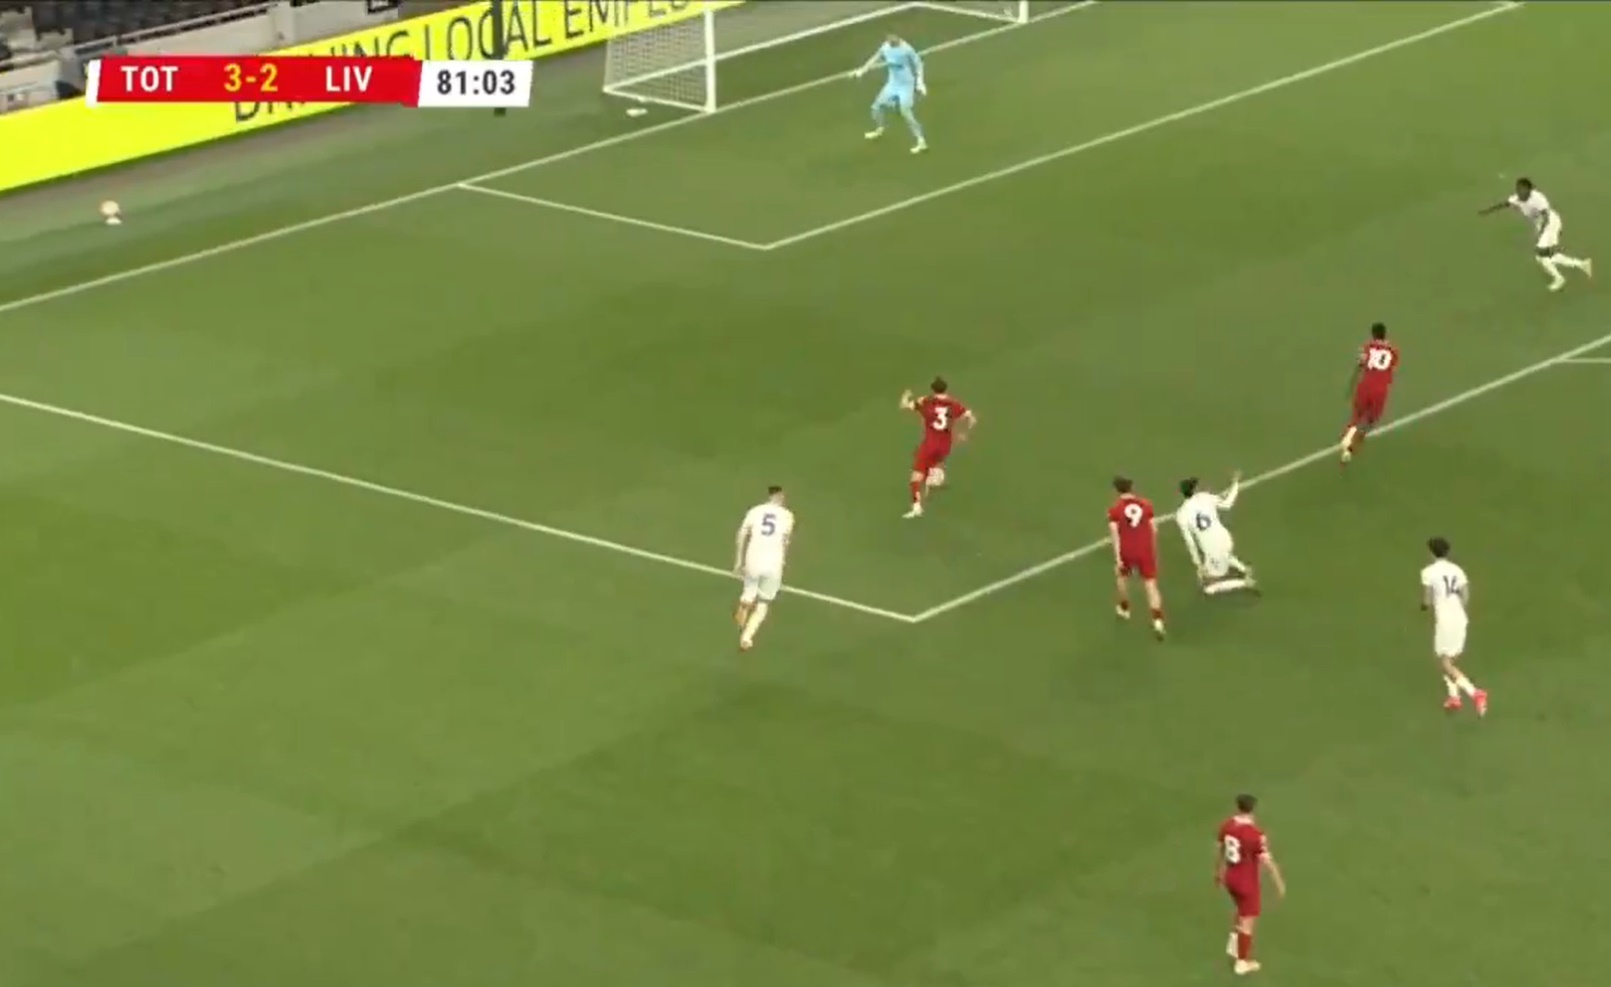 (Video) Take note, Slot: Liverpool U21 prodigy nets superb goal which’d have any manager buzzing